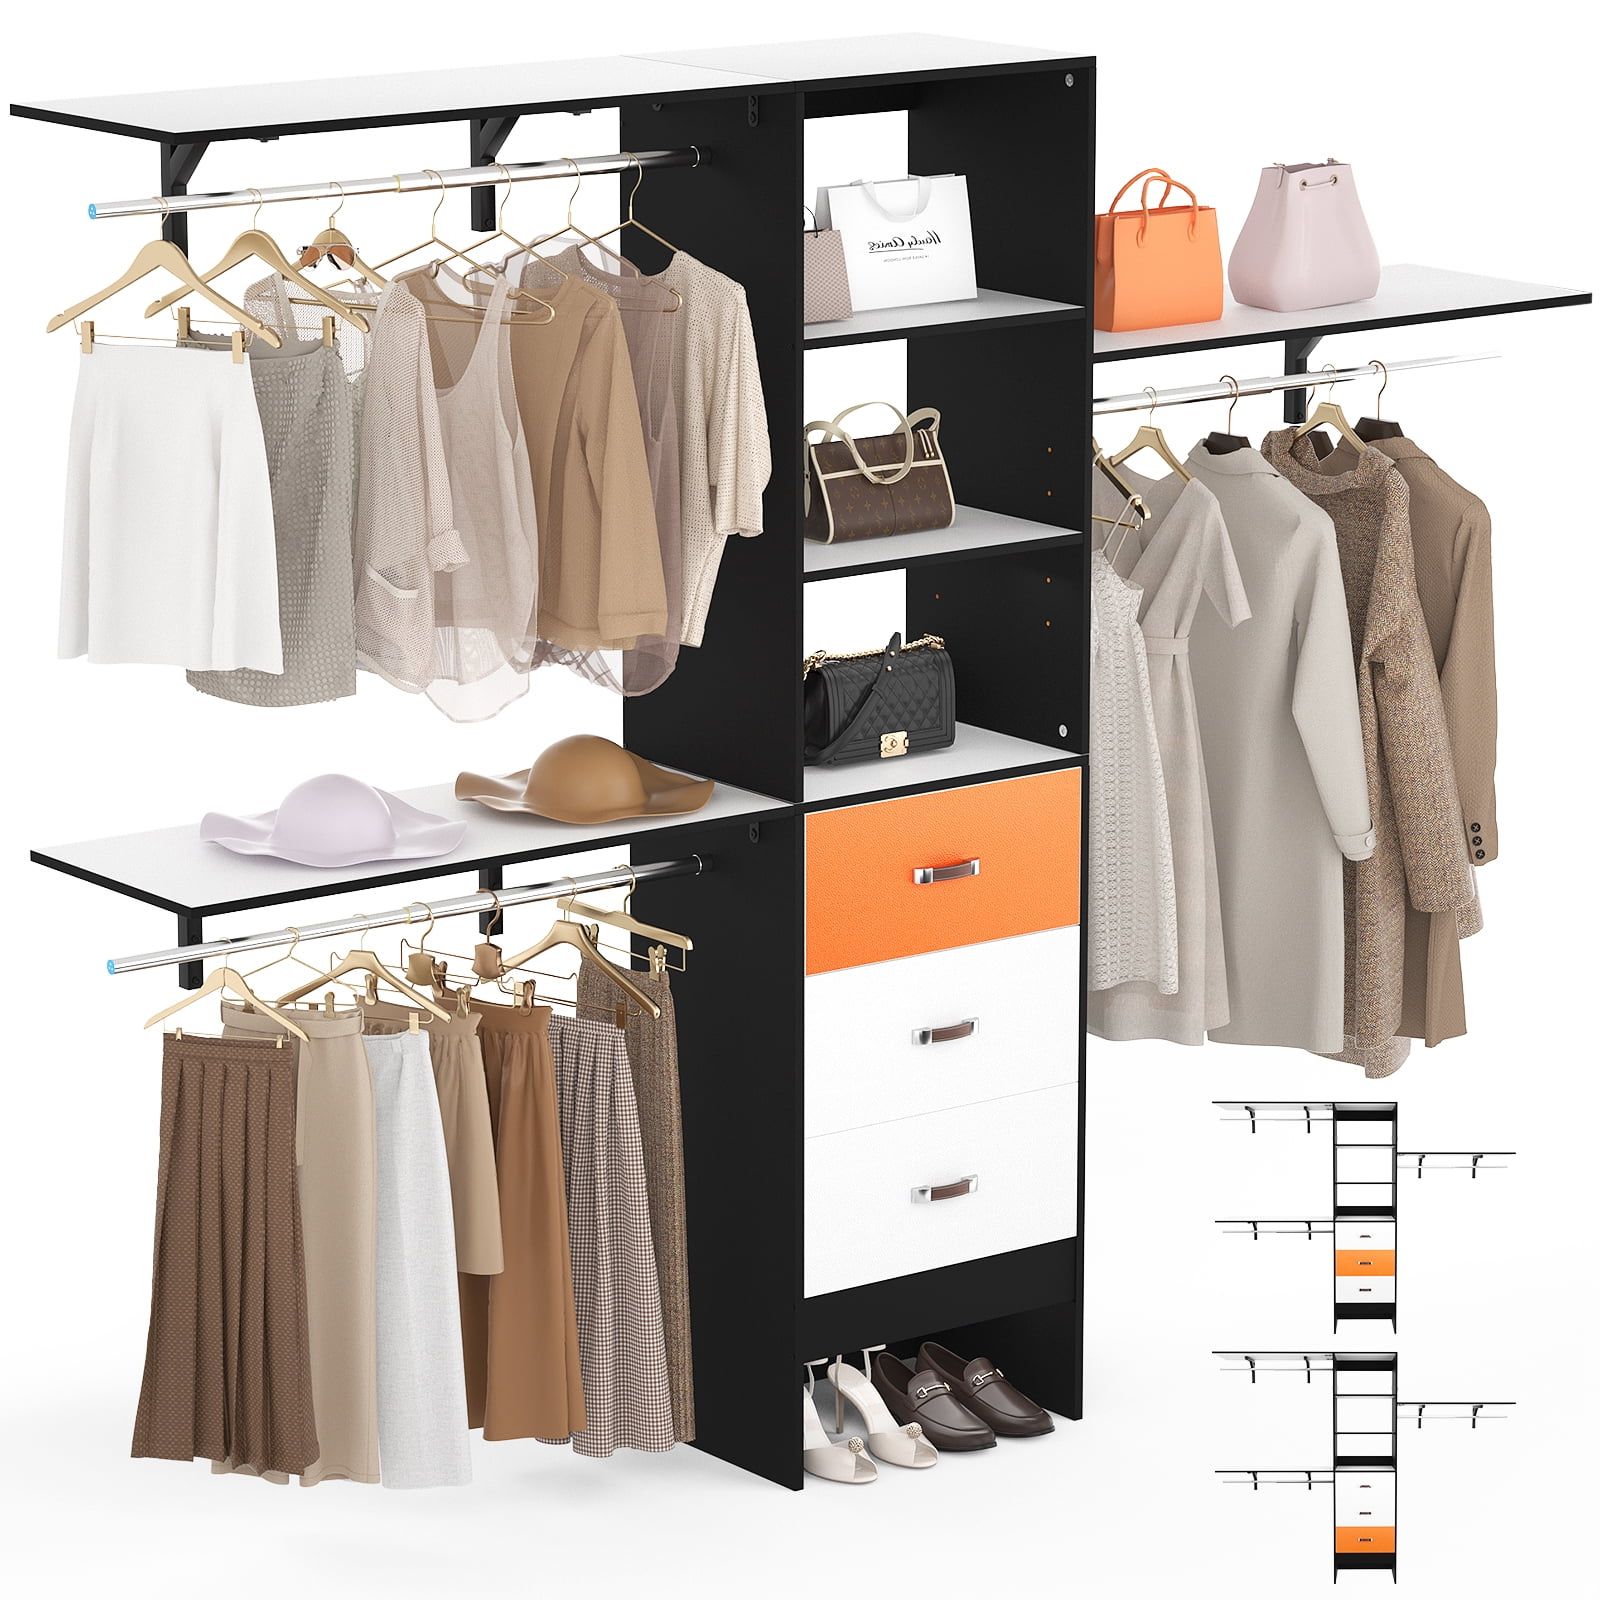 Homieasy 96 Inches Closet System, 8ft Walk In Closet Organizer With 3  Shelving Towers, Heavy Duty Clothes Rack With 3 Drawers, Built In Garment  Rack, 96" L X 16" W X 75" H, With Regard To 3 Shelving Towers Wardrobes (Gallery 3 of 20)